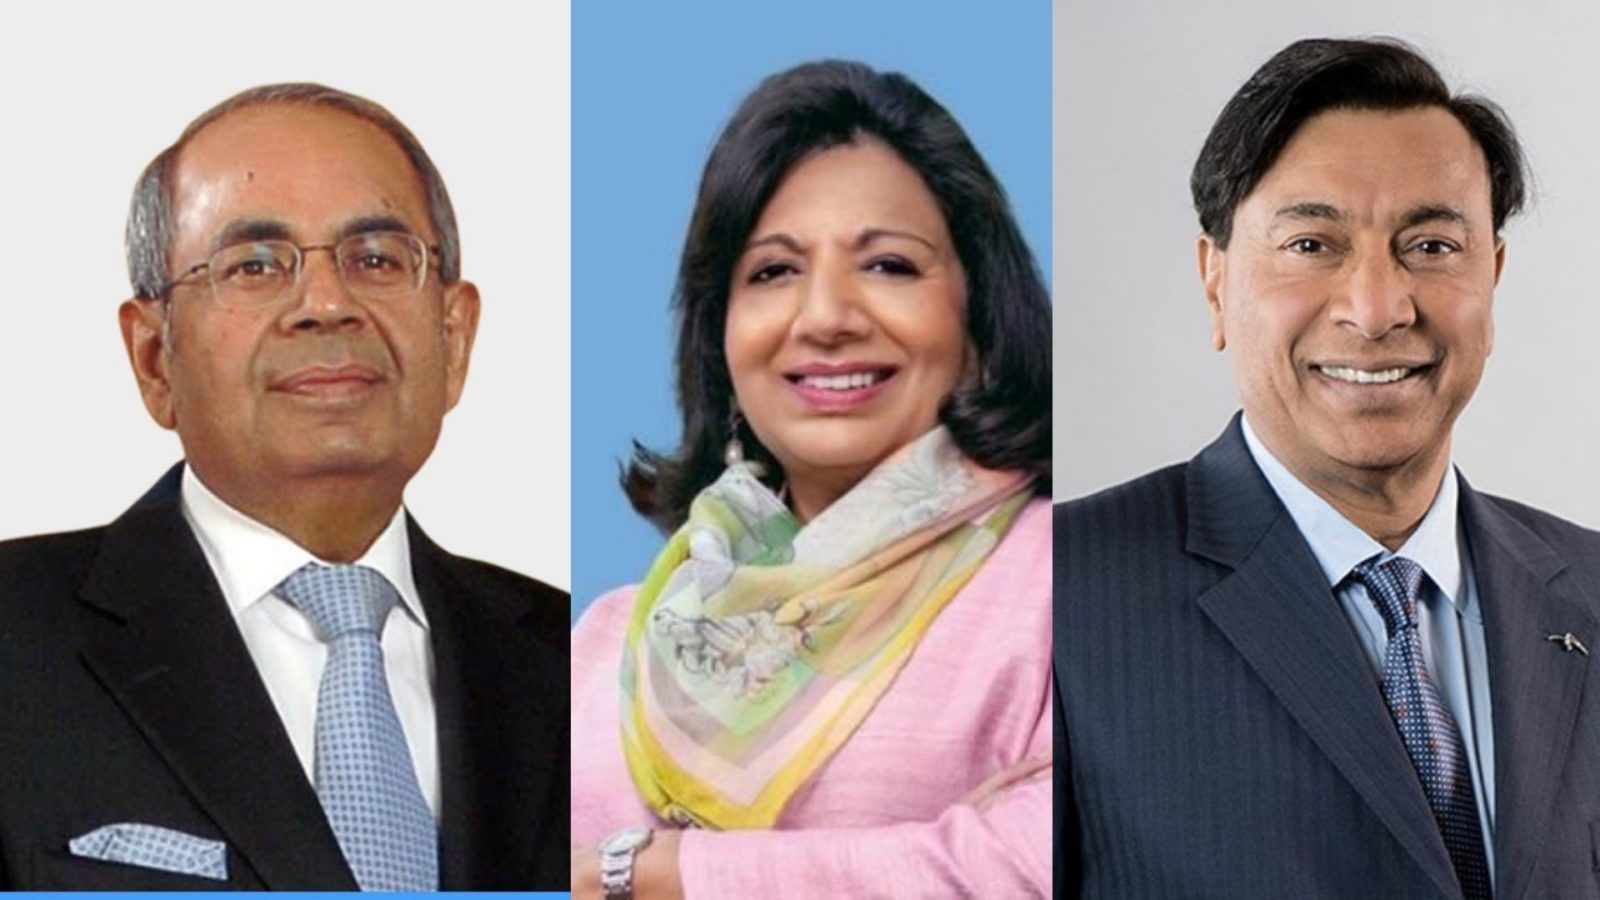 Sunday Times Rich List 2022: Hindujas, Lakshmi Mittal, and Kiran Mazumdar-Shaw among the wealthiest people in Britain